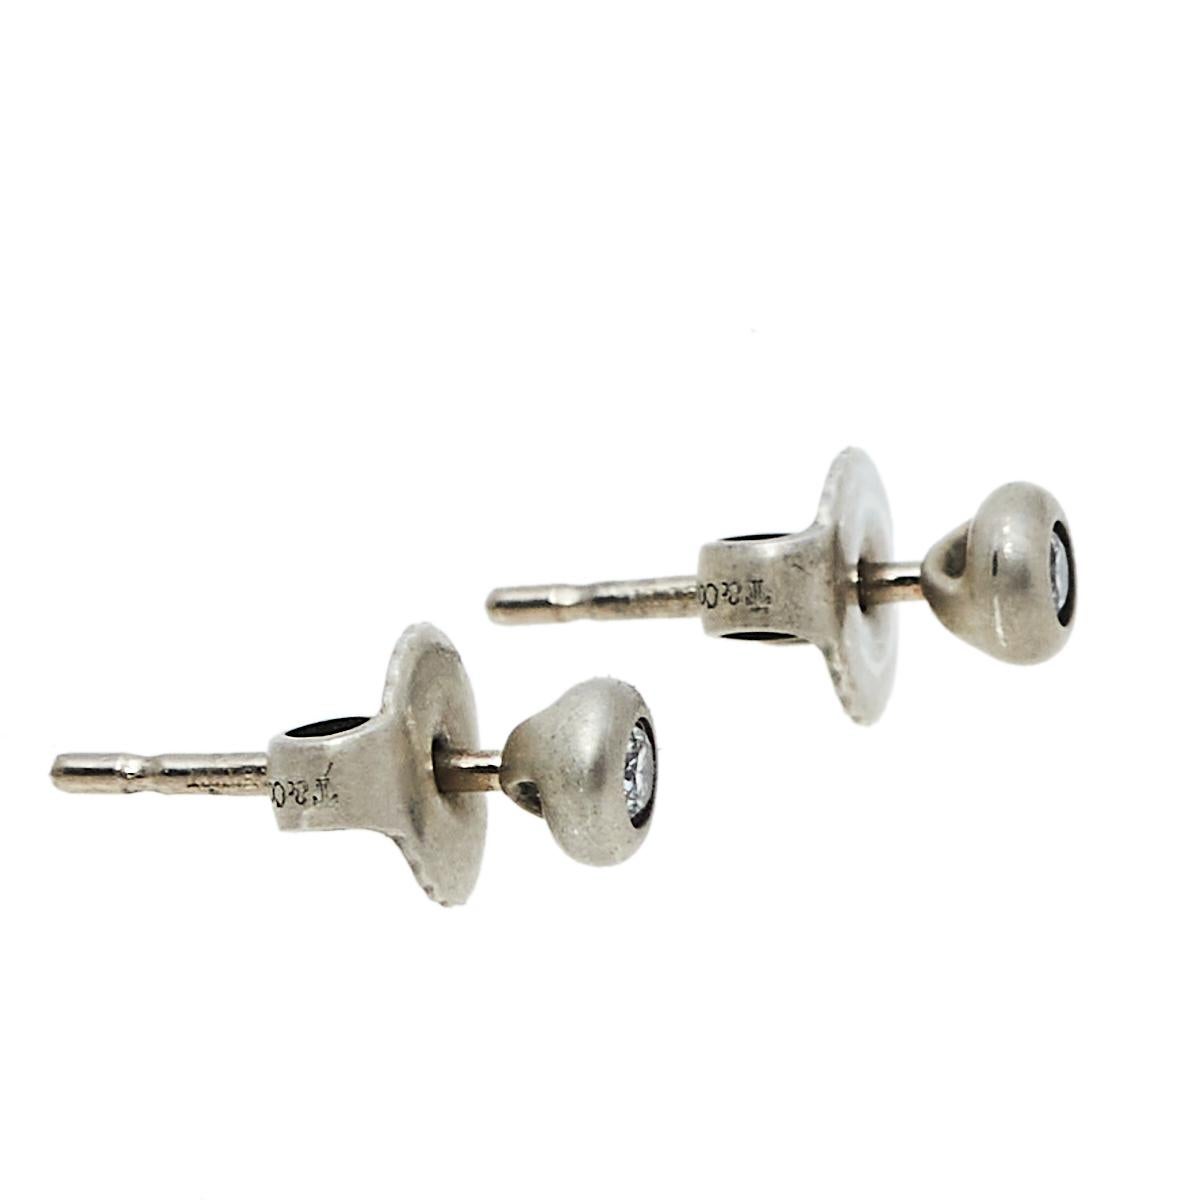 Take your new-season style up a notch with these Tiffany & Co. silver stud earrings. Crafted aesthetically with round diamond studs in the front and secured with push-back fasteners behind, these earrings will compliment all your outfits.

Includes: